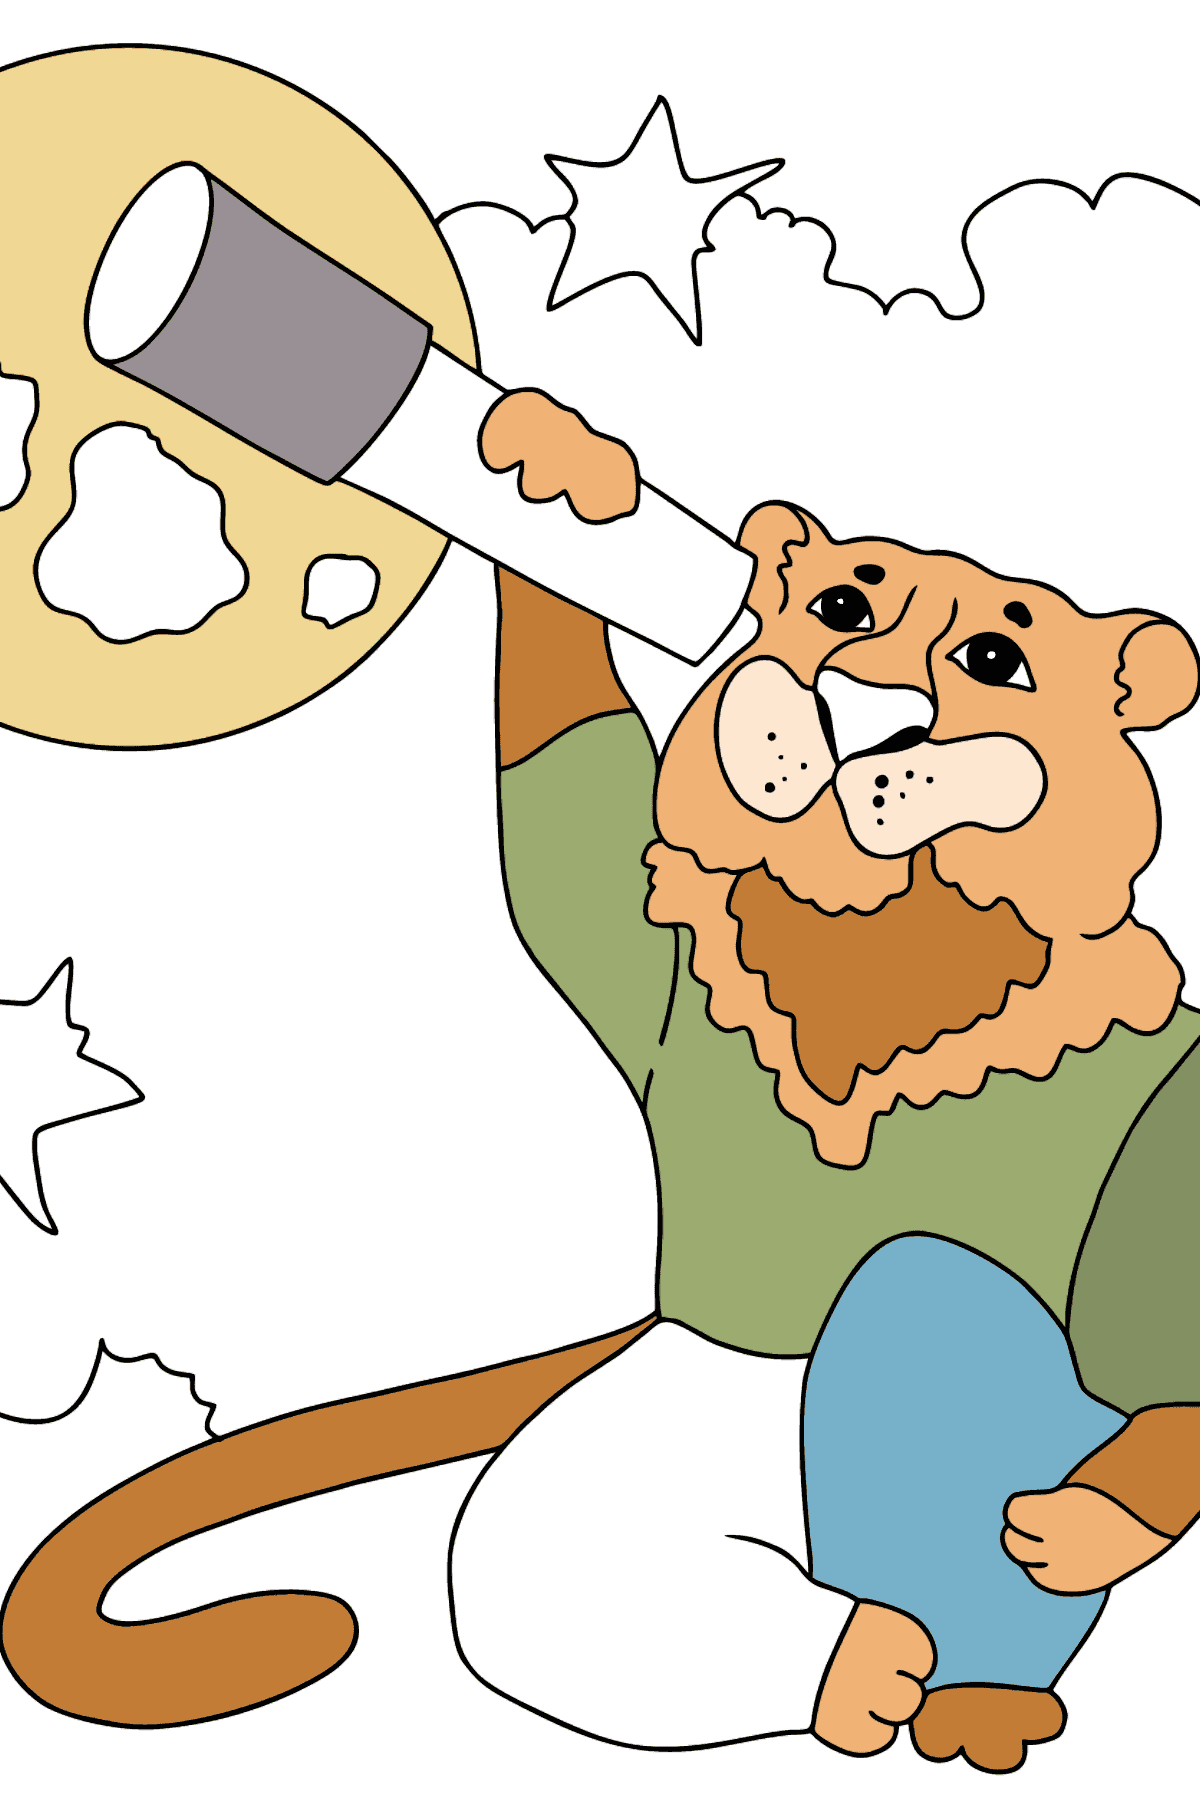 Coloring Page - A Tiger is Gazing at the Stars - Coloring Pages for Kids